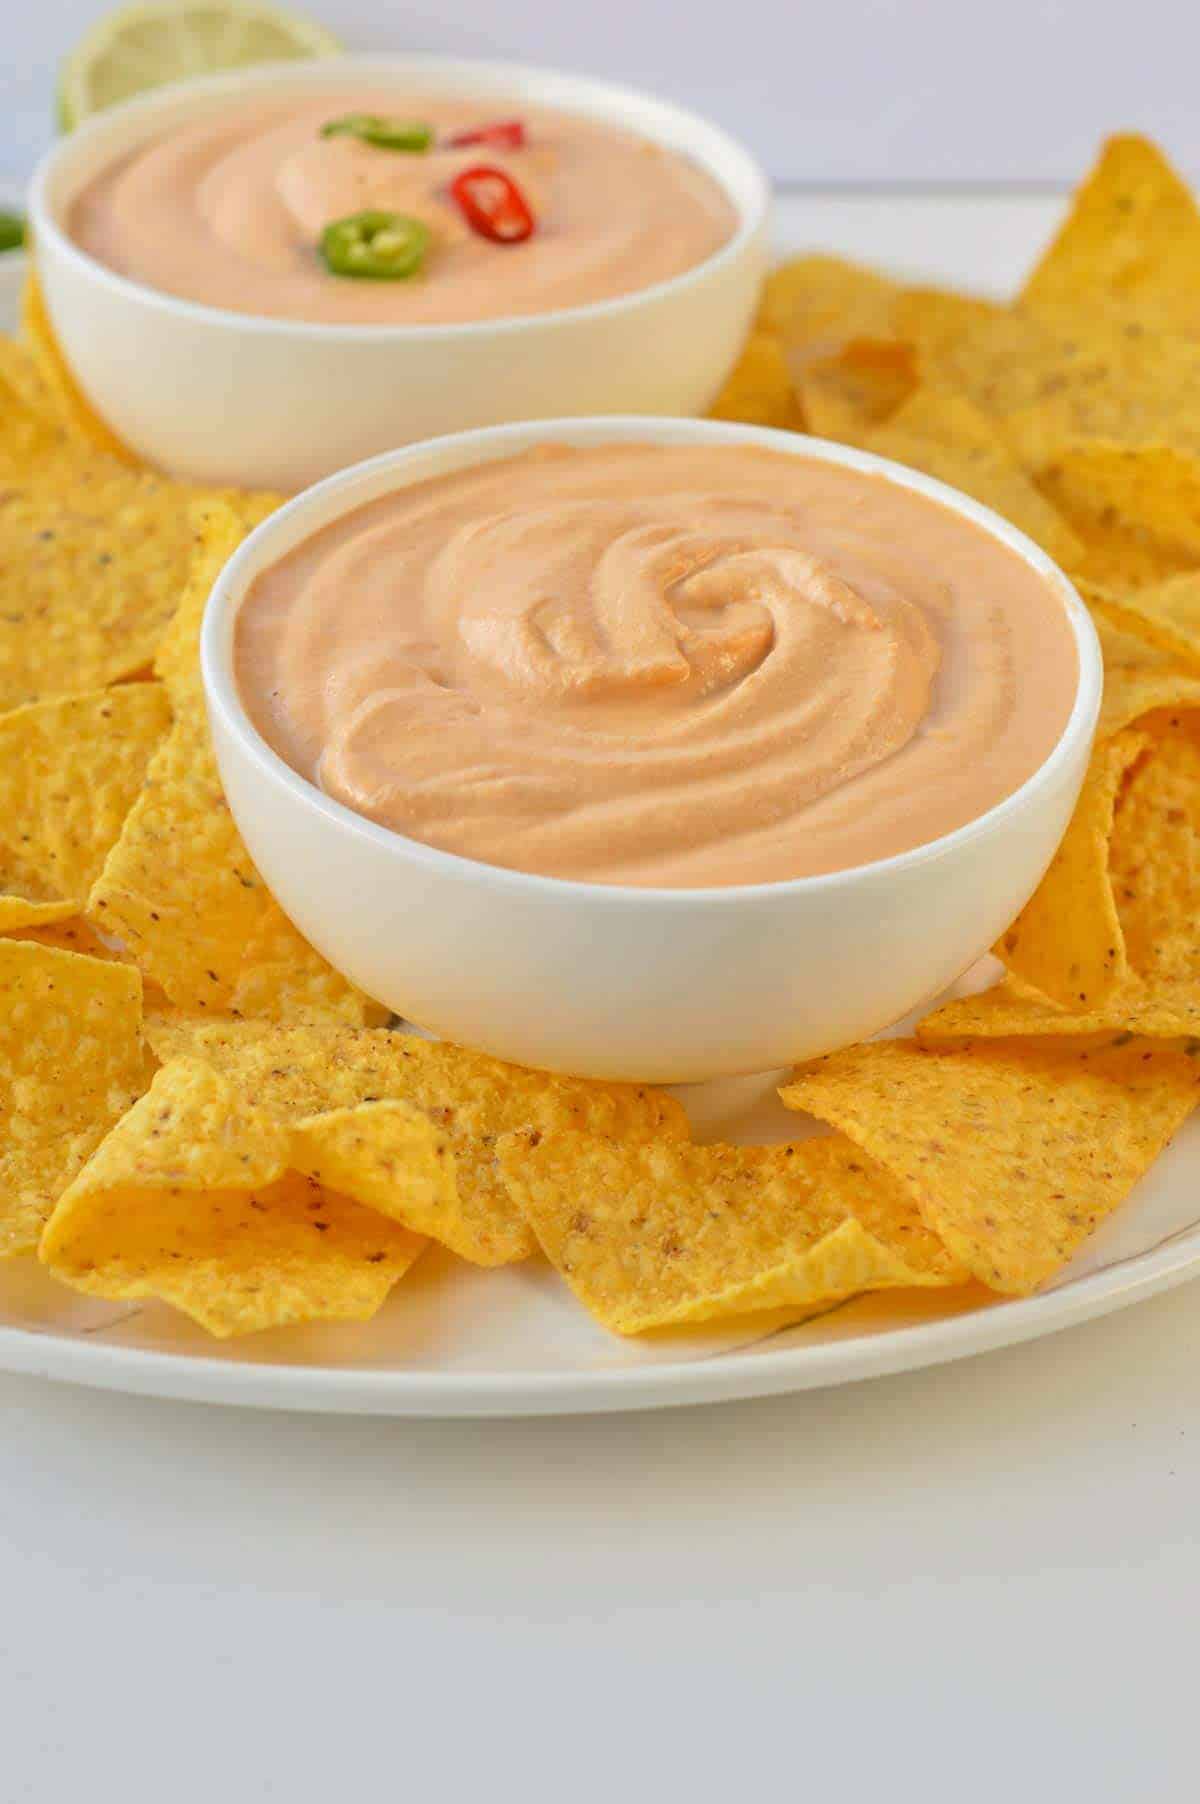 Bowl of vegan nacho cheese sauce on a plate filled with corn tortilla chips.